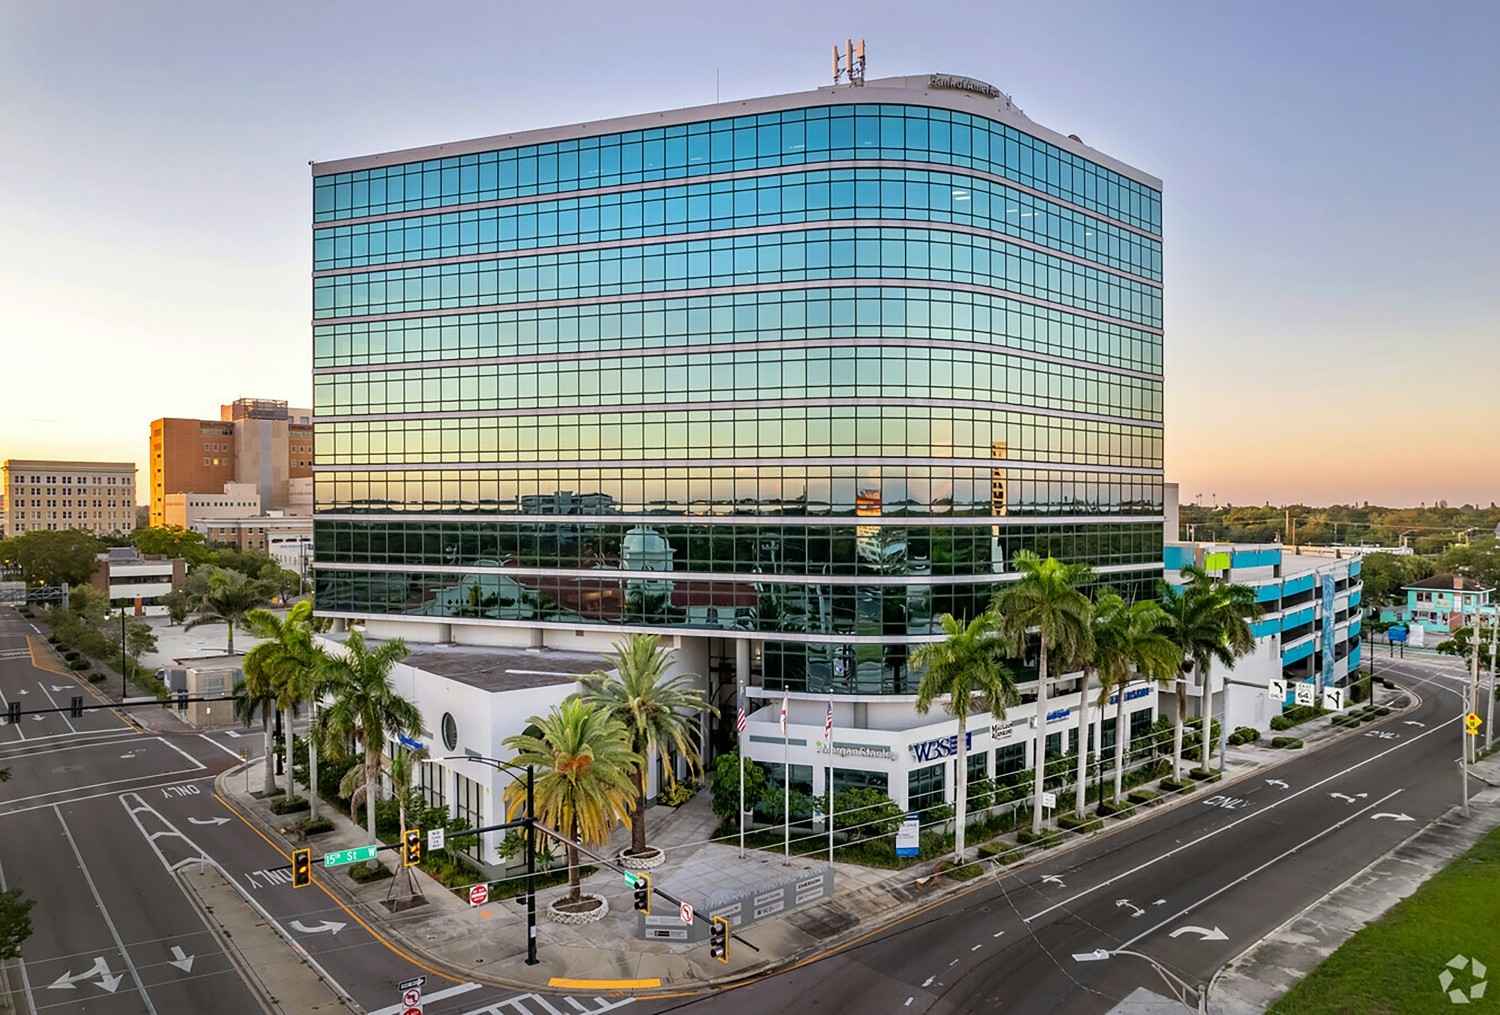 The Qure4u world headquarters in Bradenton, FL, features gorgeous views and an on-site Experience Center.